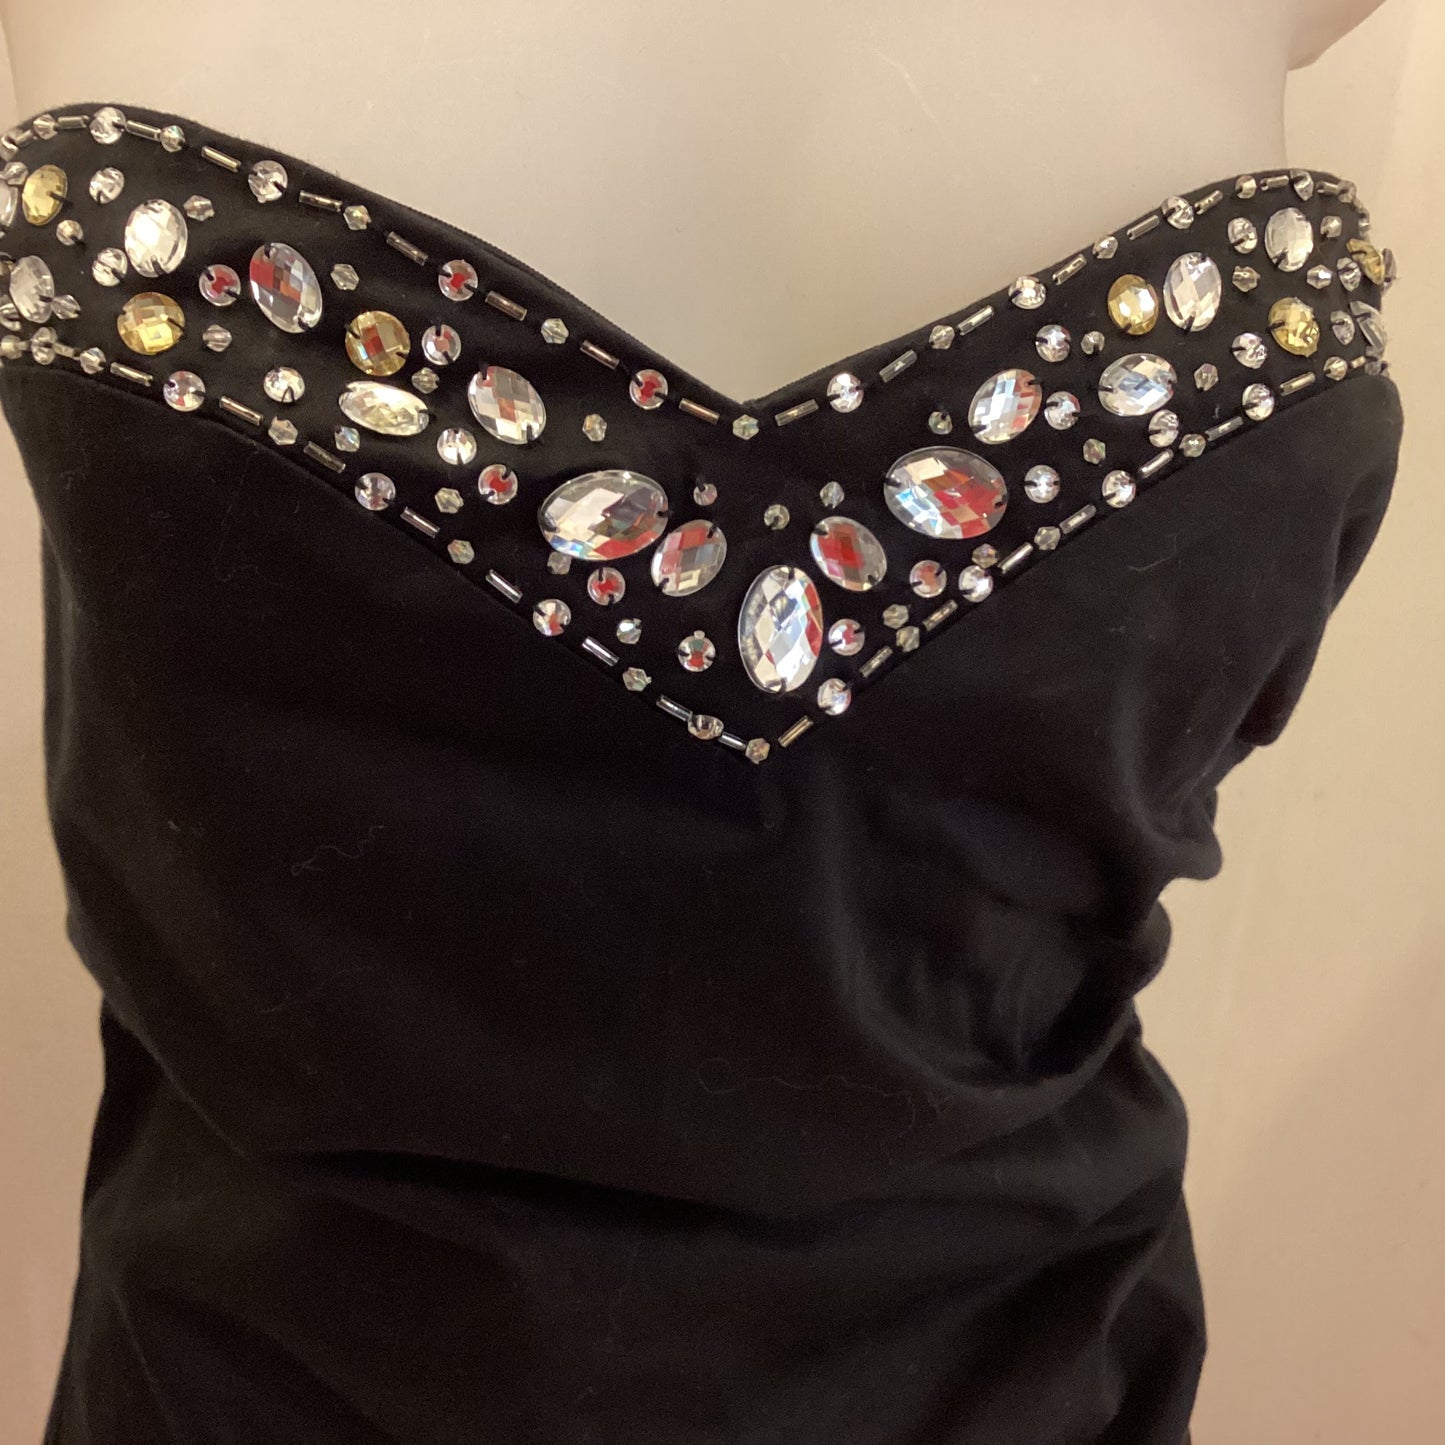 Lipsy Black Strapless Cocktail Party Dress w/Beaded Detail at Bust Size 12